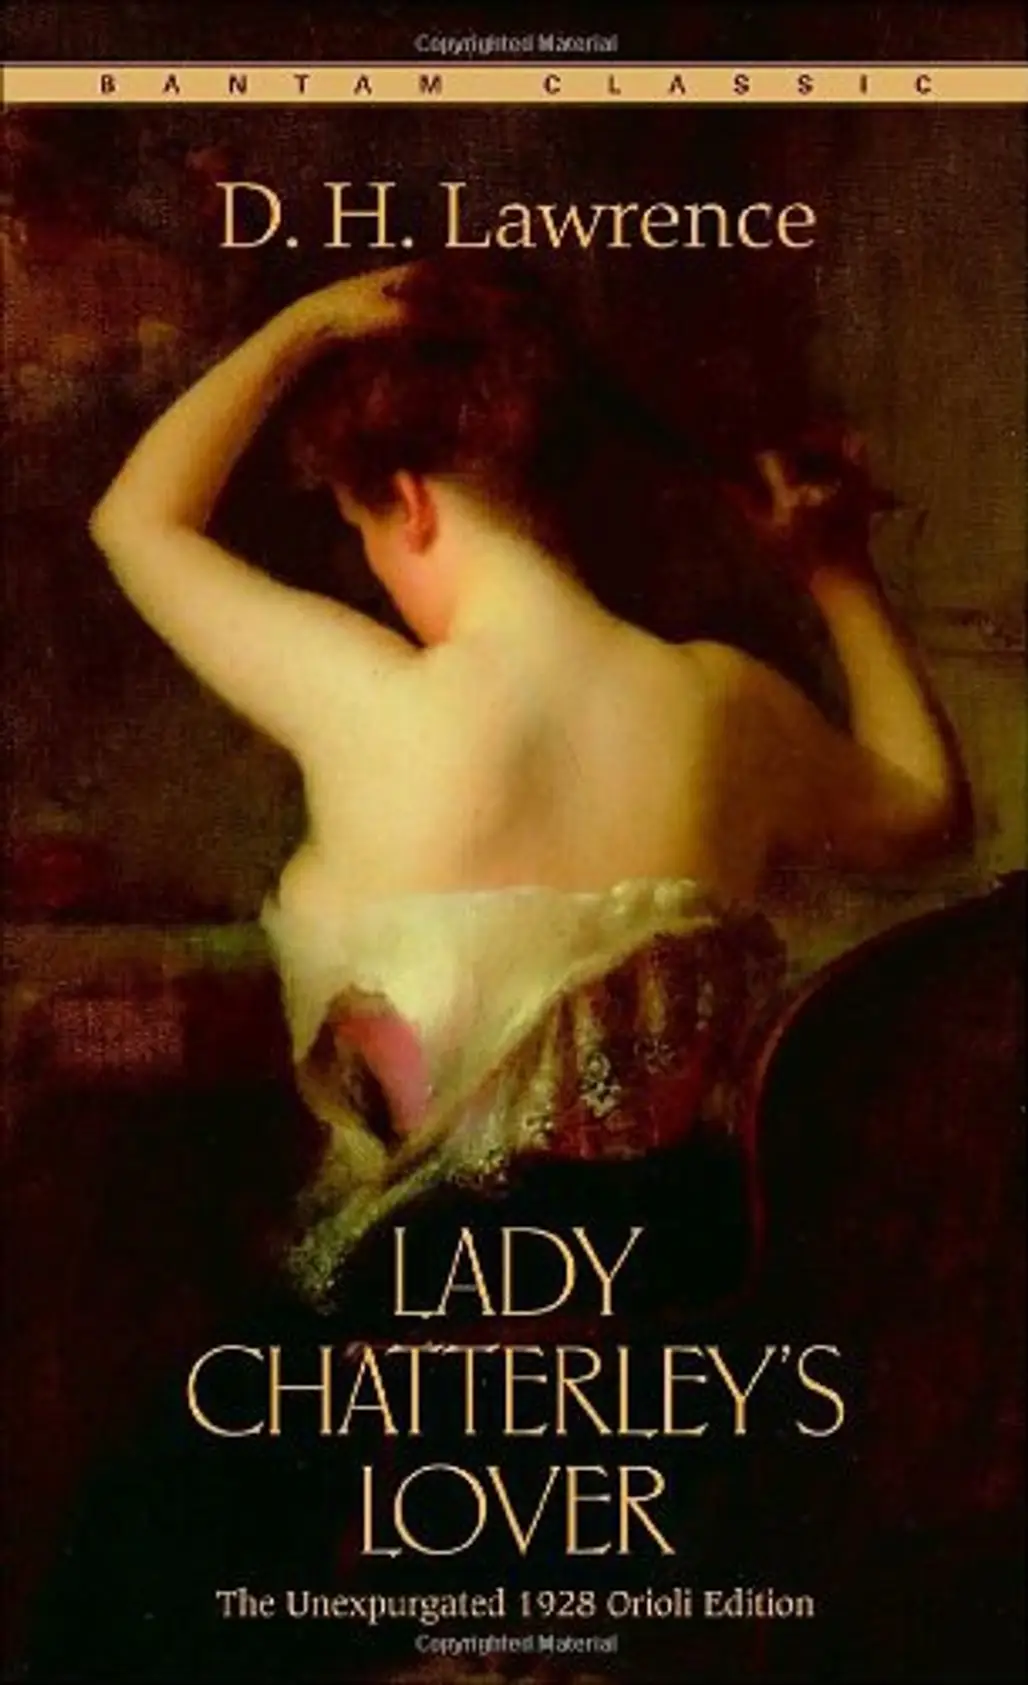 Lady Chatterly's Lover by D. H. Lawrence